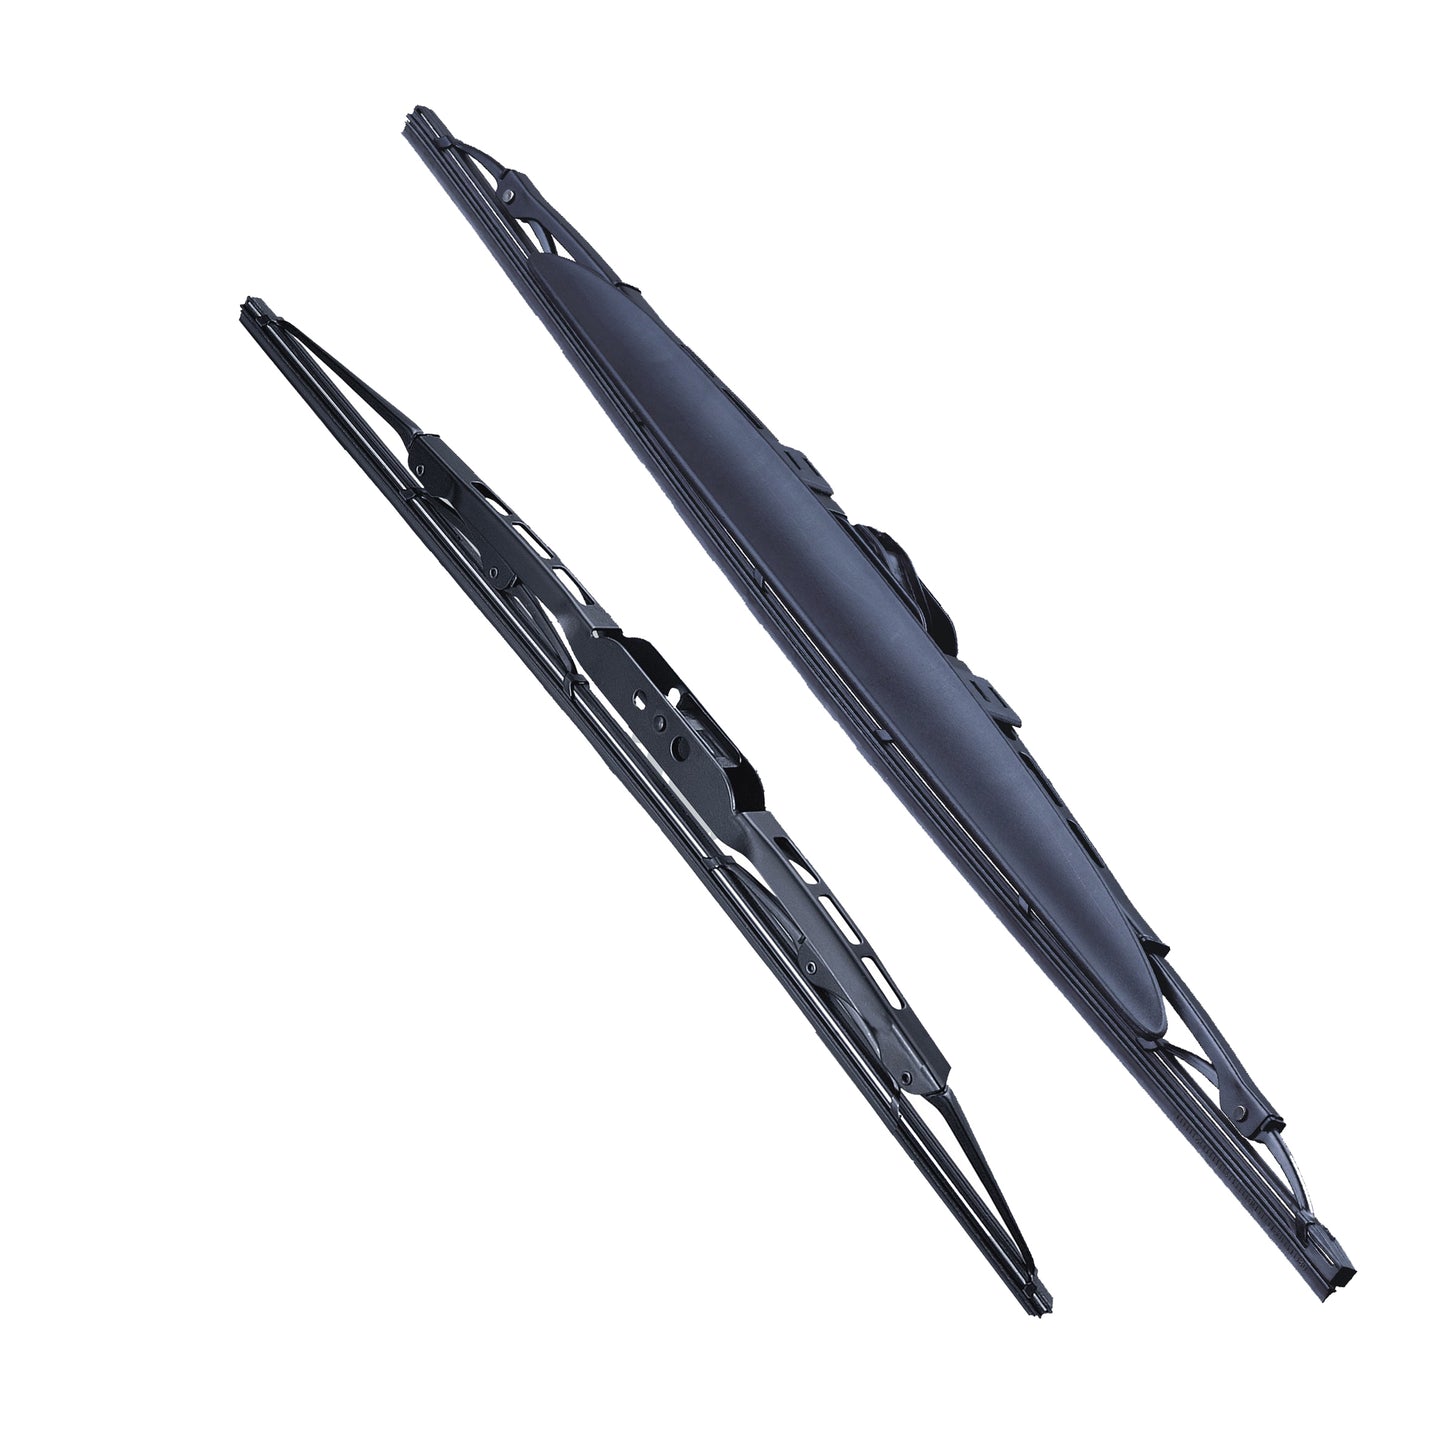 VAUXHALL ASTRA Coupe Mar 2000 to Aug 2005 Wiper Blade Kit